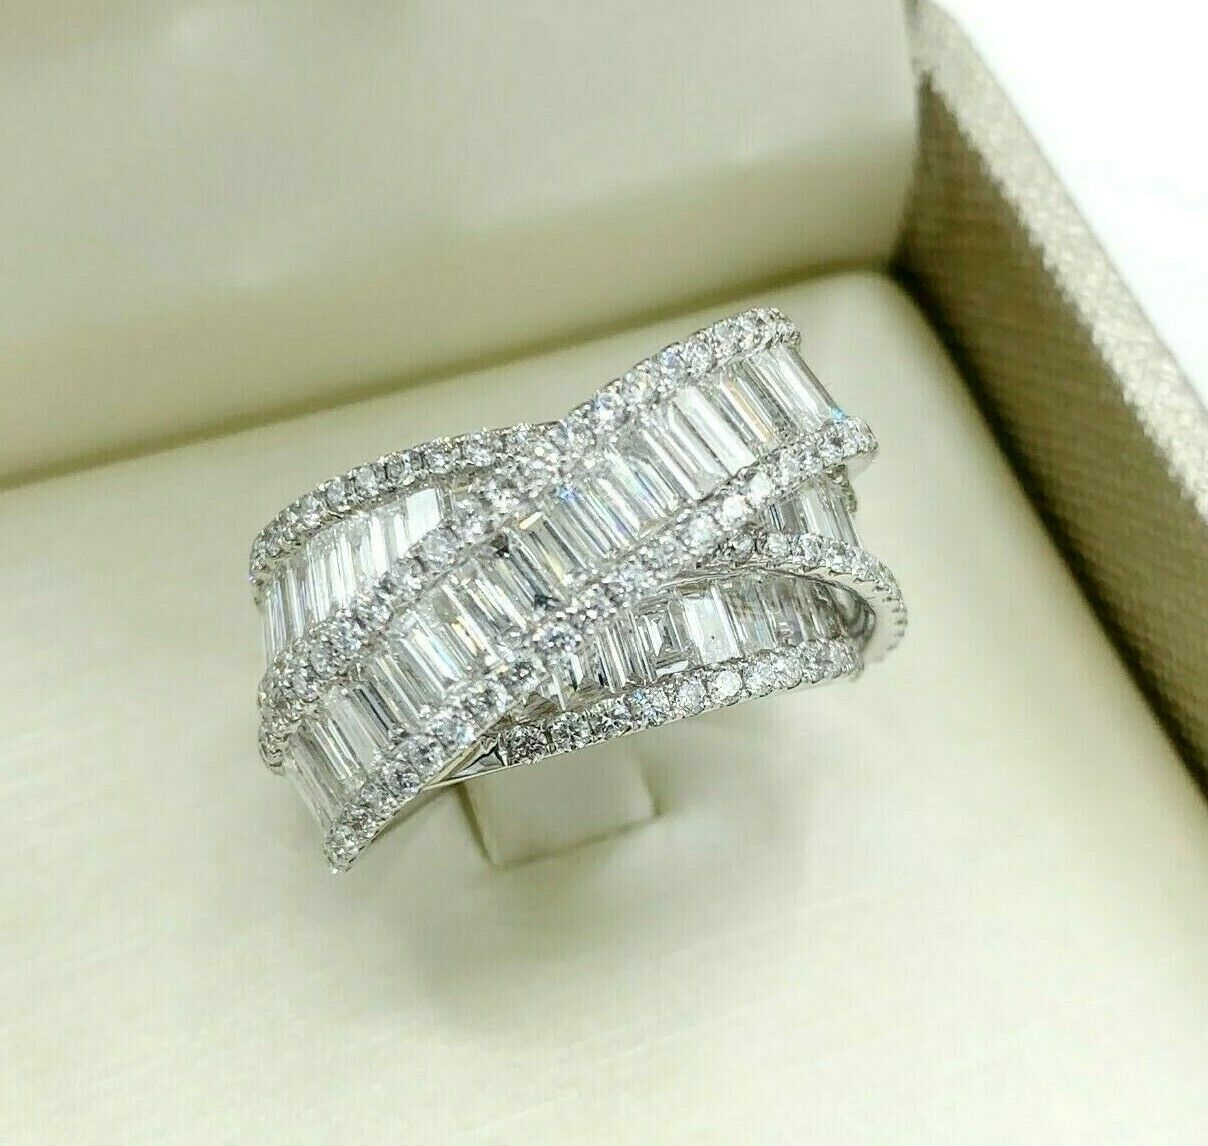 4.10 Carats Baguette & Round Diamond 13mm Wide Channel Prong Anniversary Ring18K